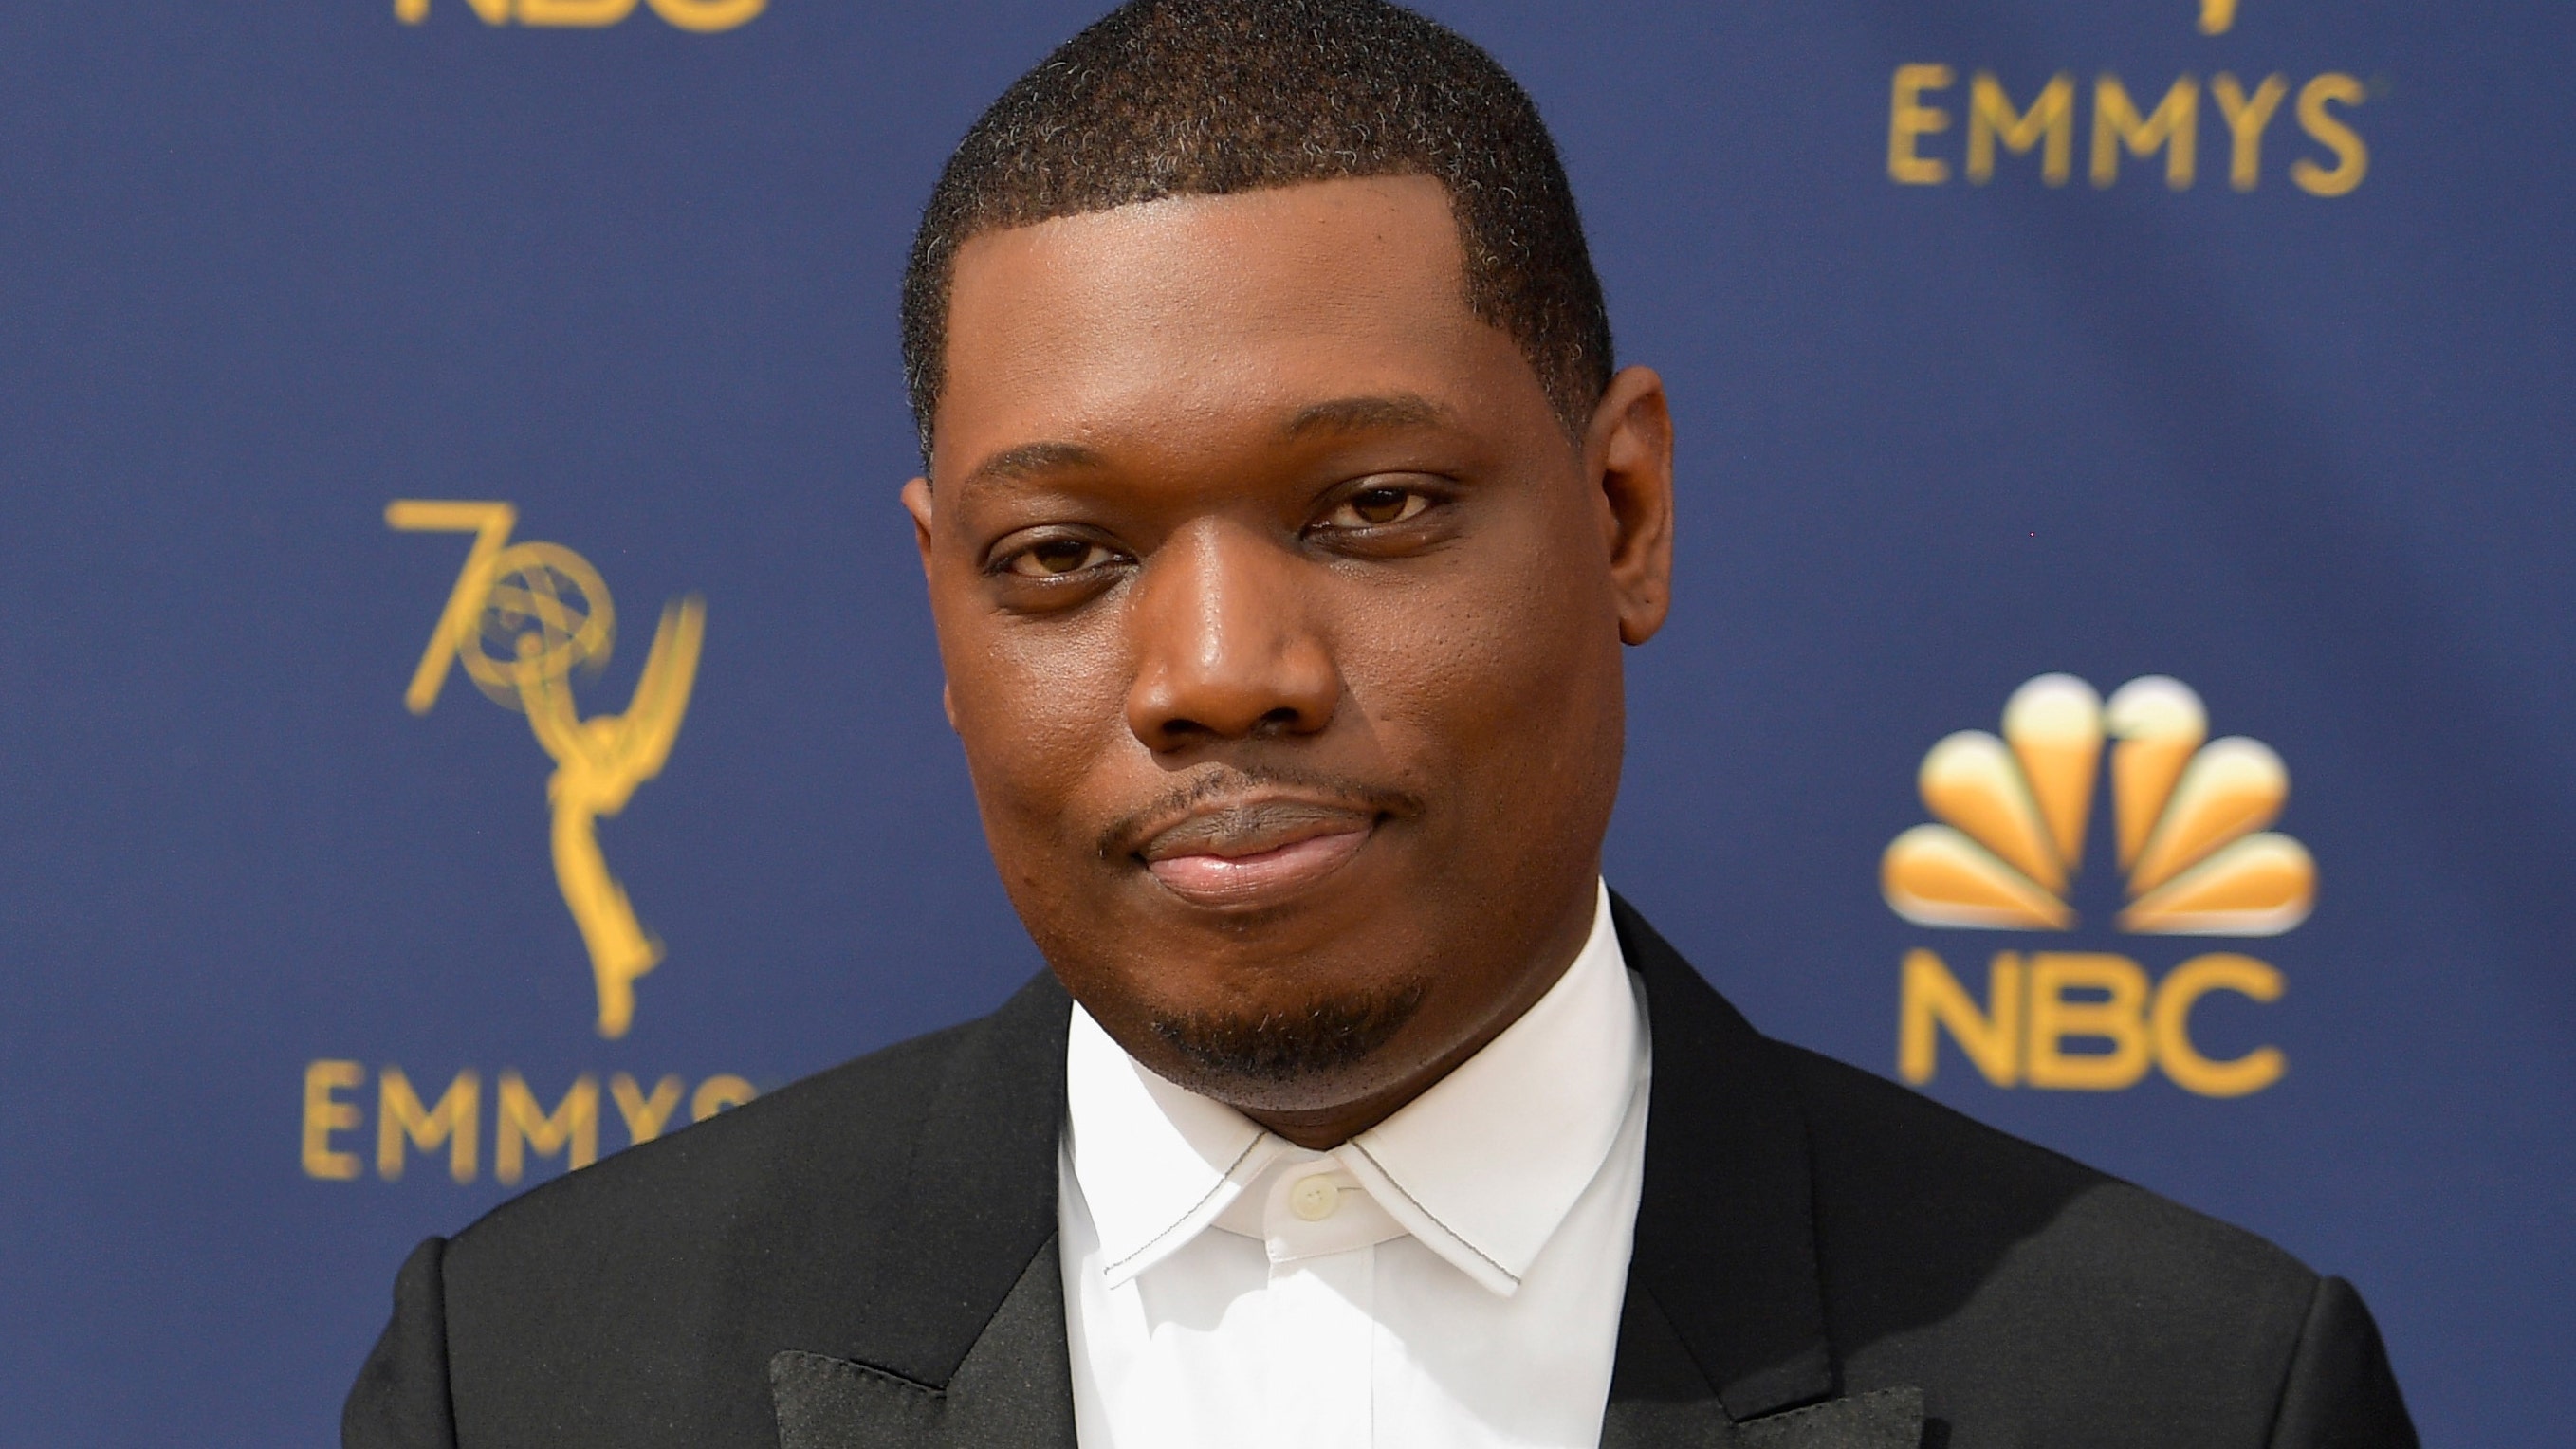 'SNL's' Michael Che, NBC accused of 'antisemitic trope' in 'Weekend Update' segment: 'Retract and apologize'